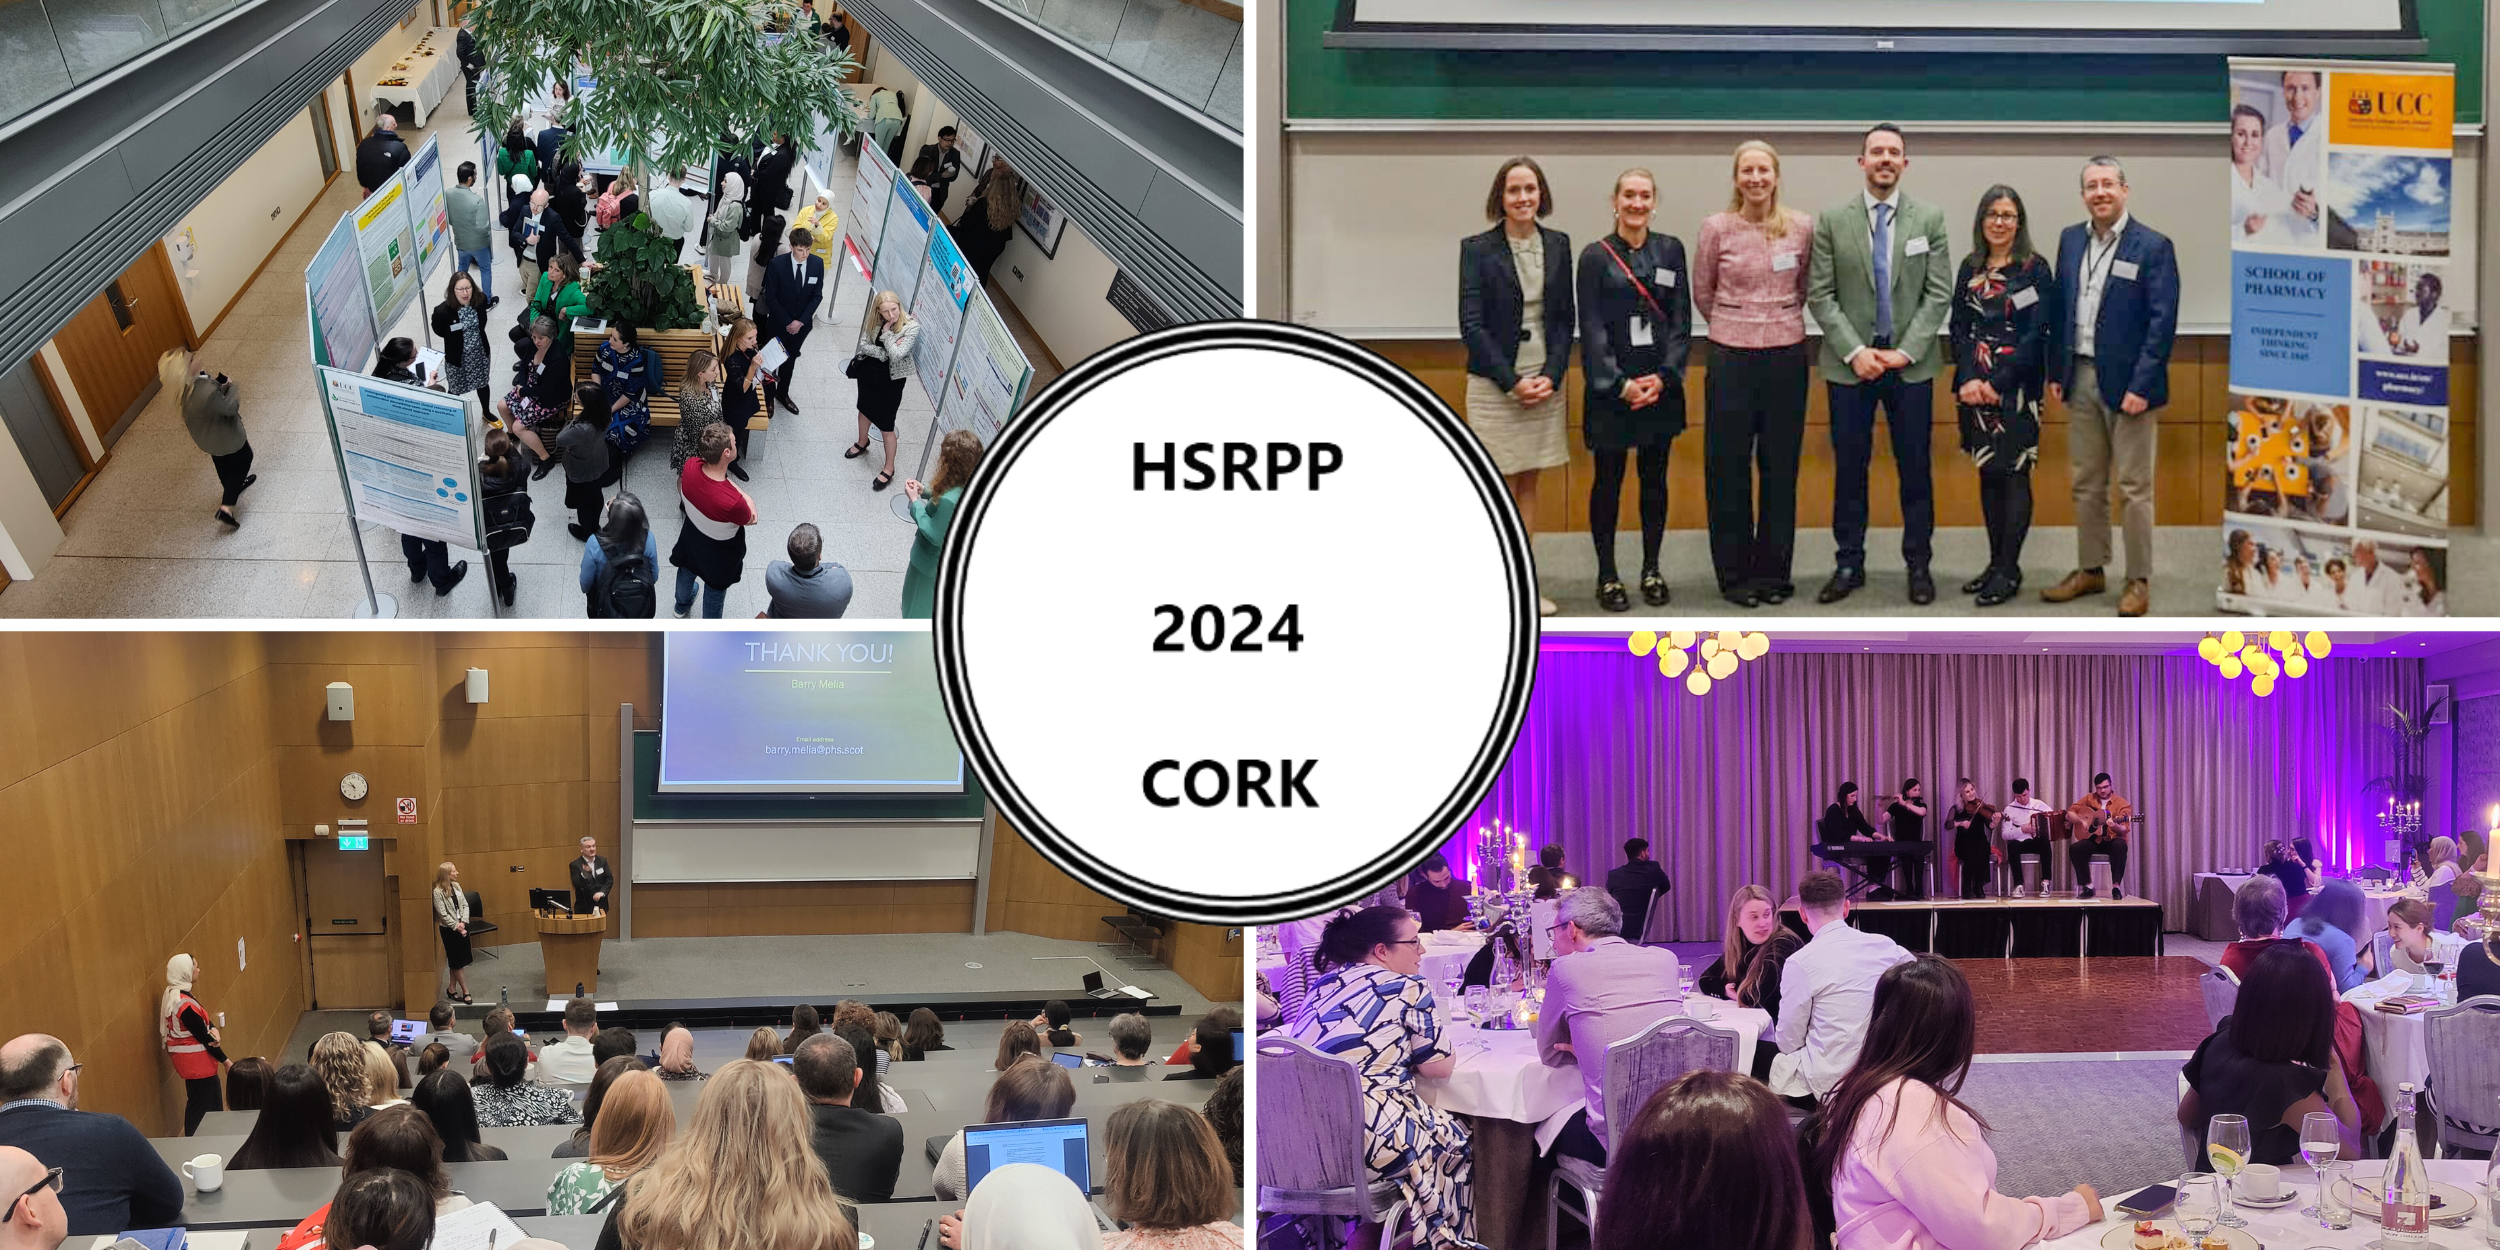 The School of Pharmacy Hosts the Health Services Research and Pharmacy Practice (HSRPP) Conference 2024